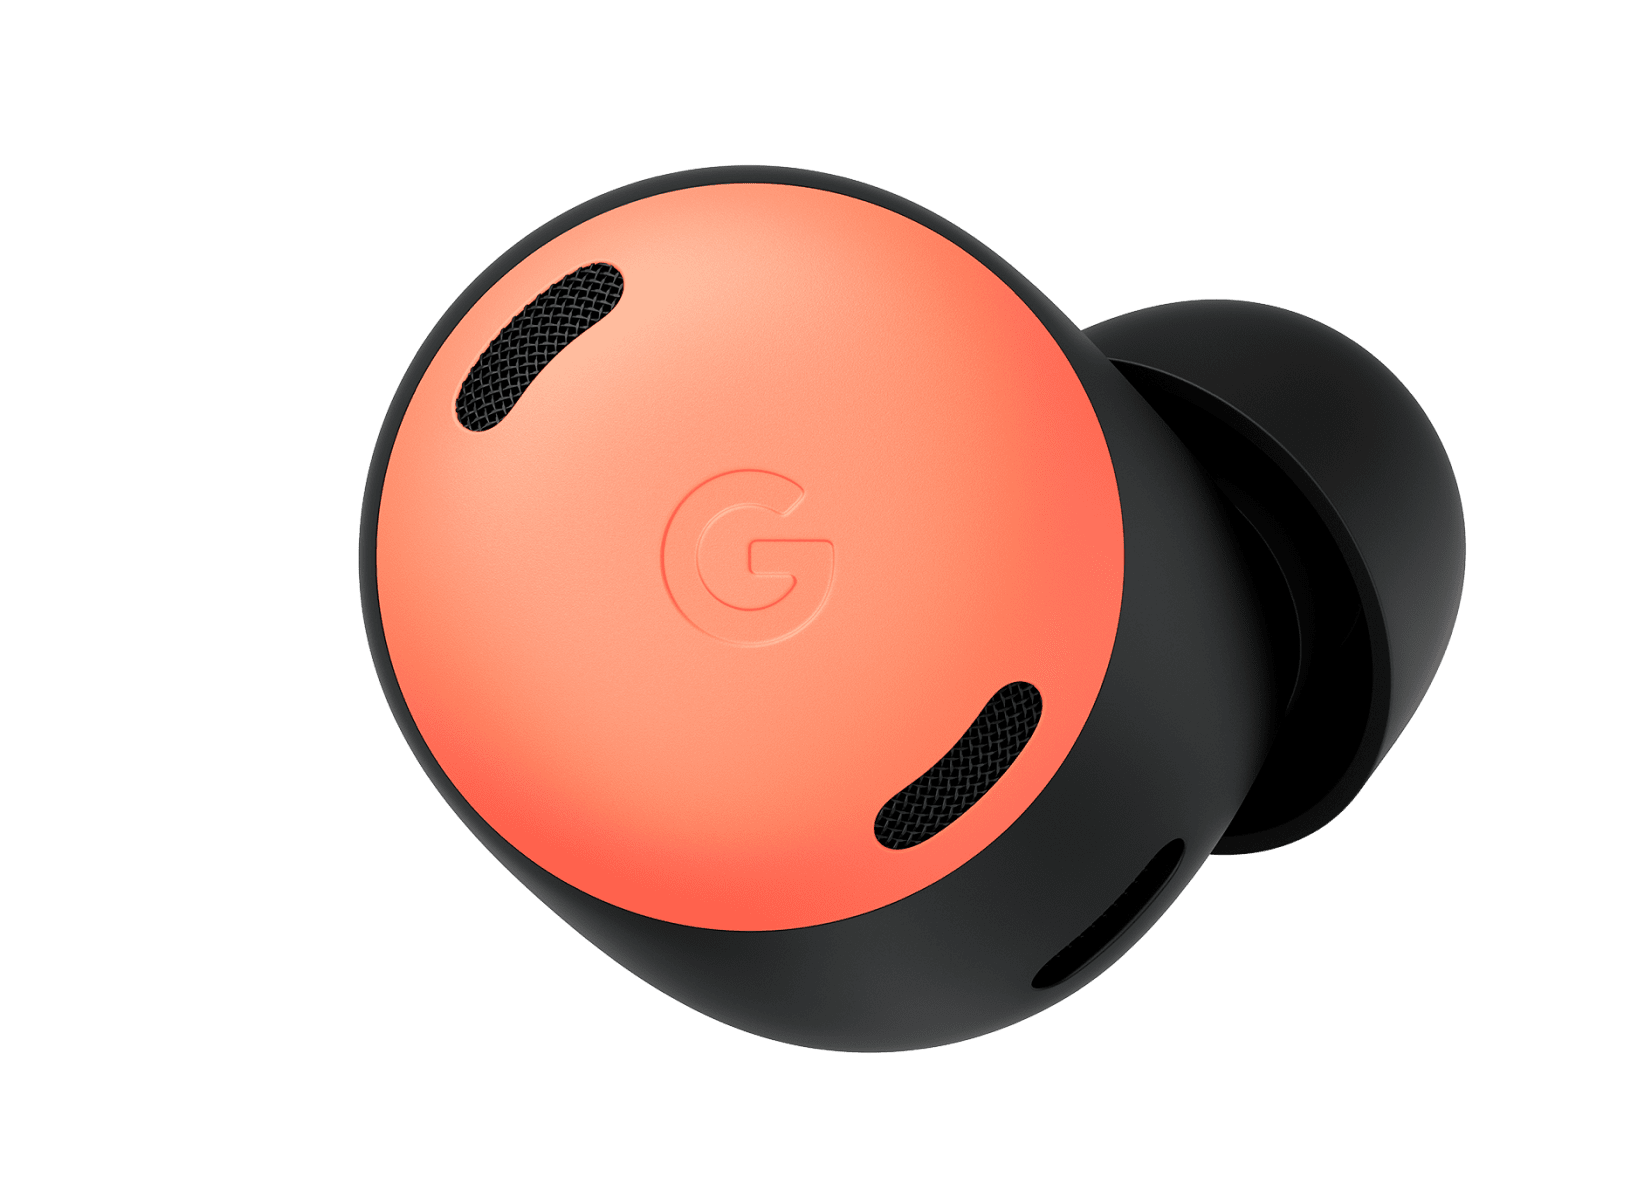 Front-view of a Pixel Buds Pro earbud in Coral